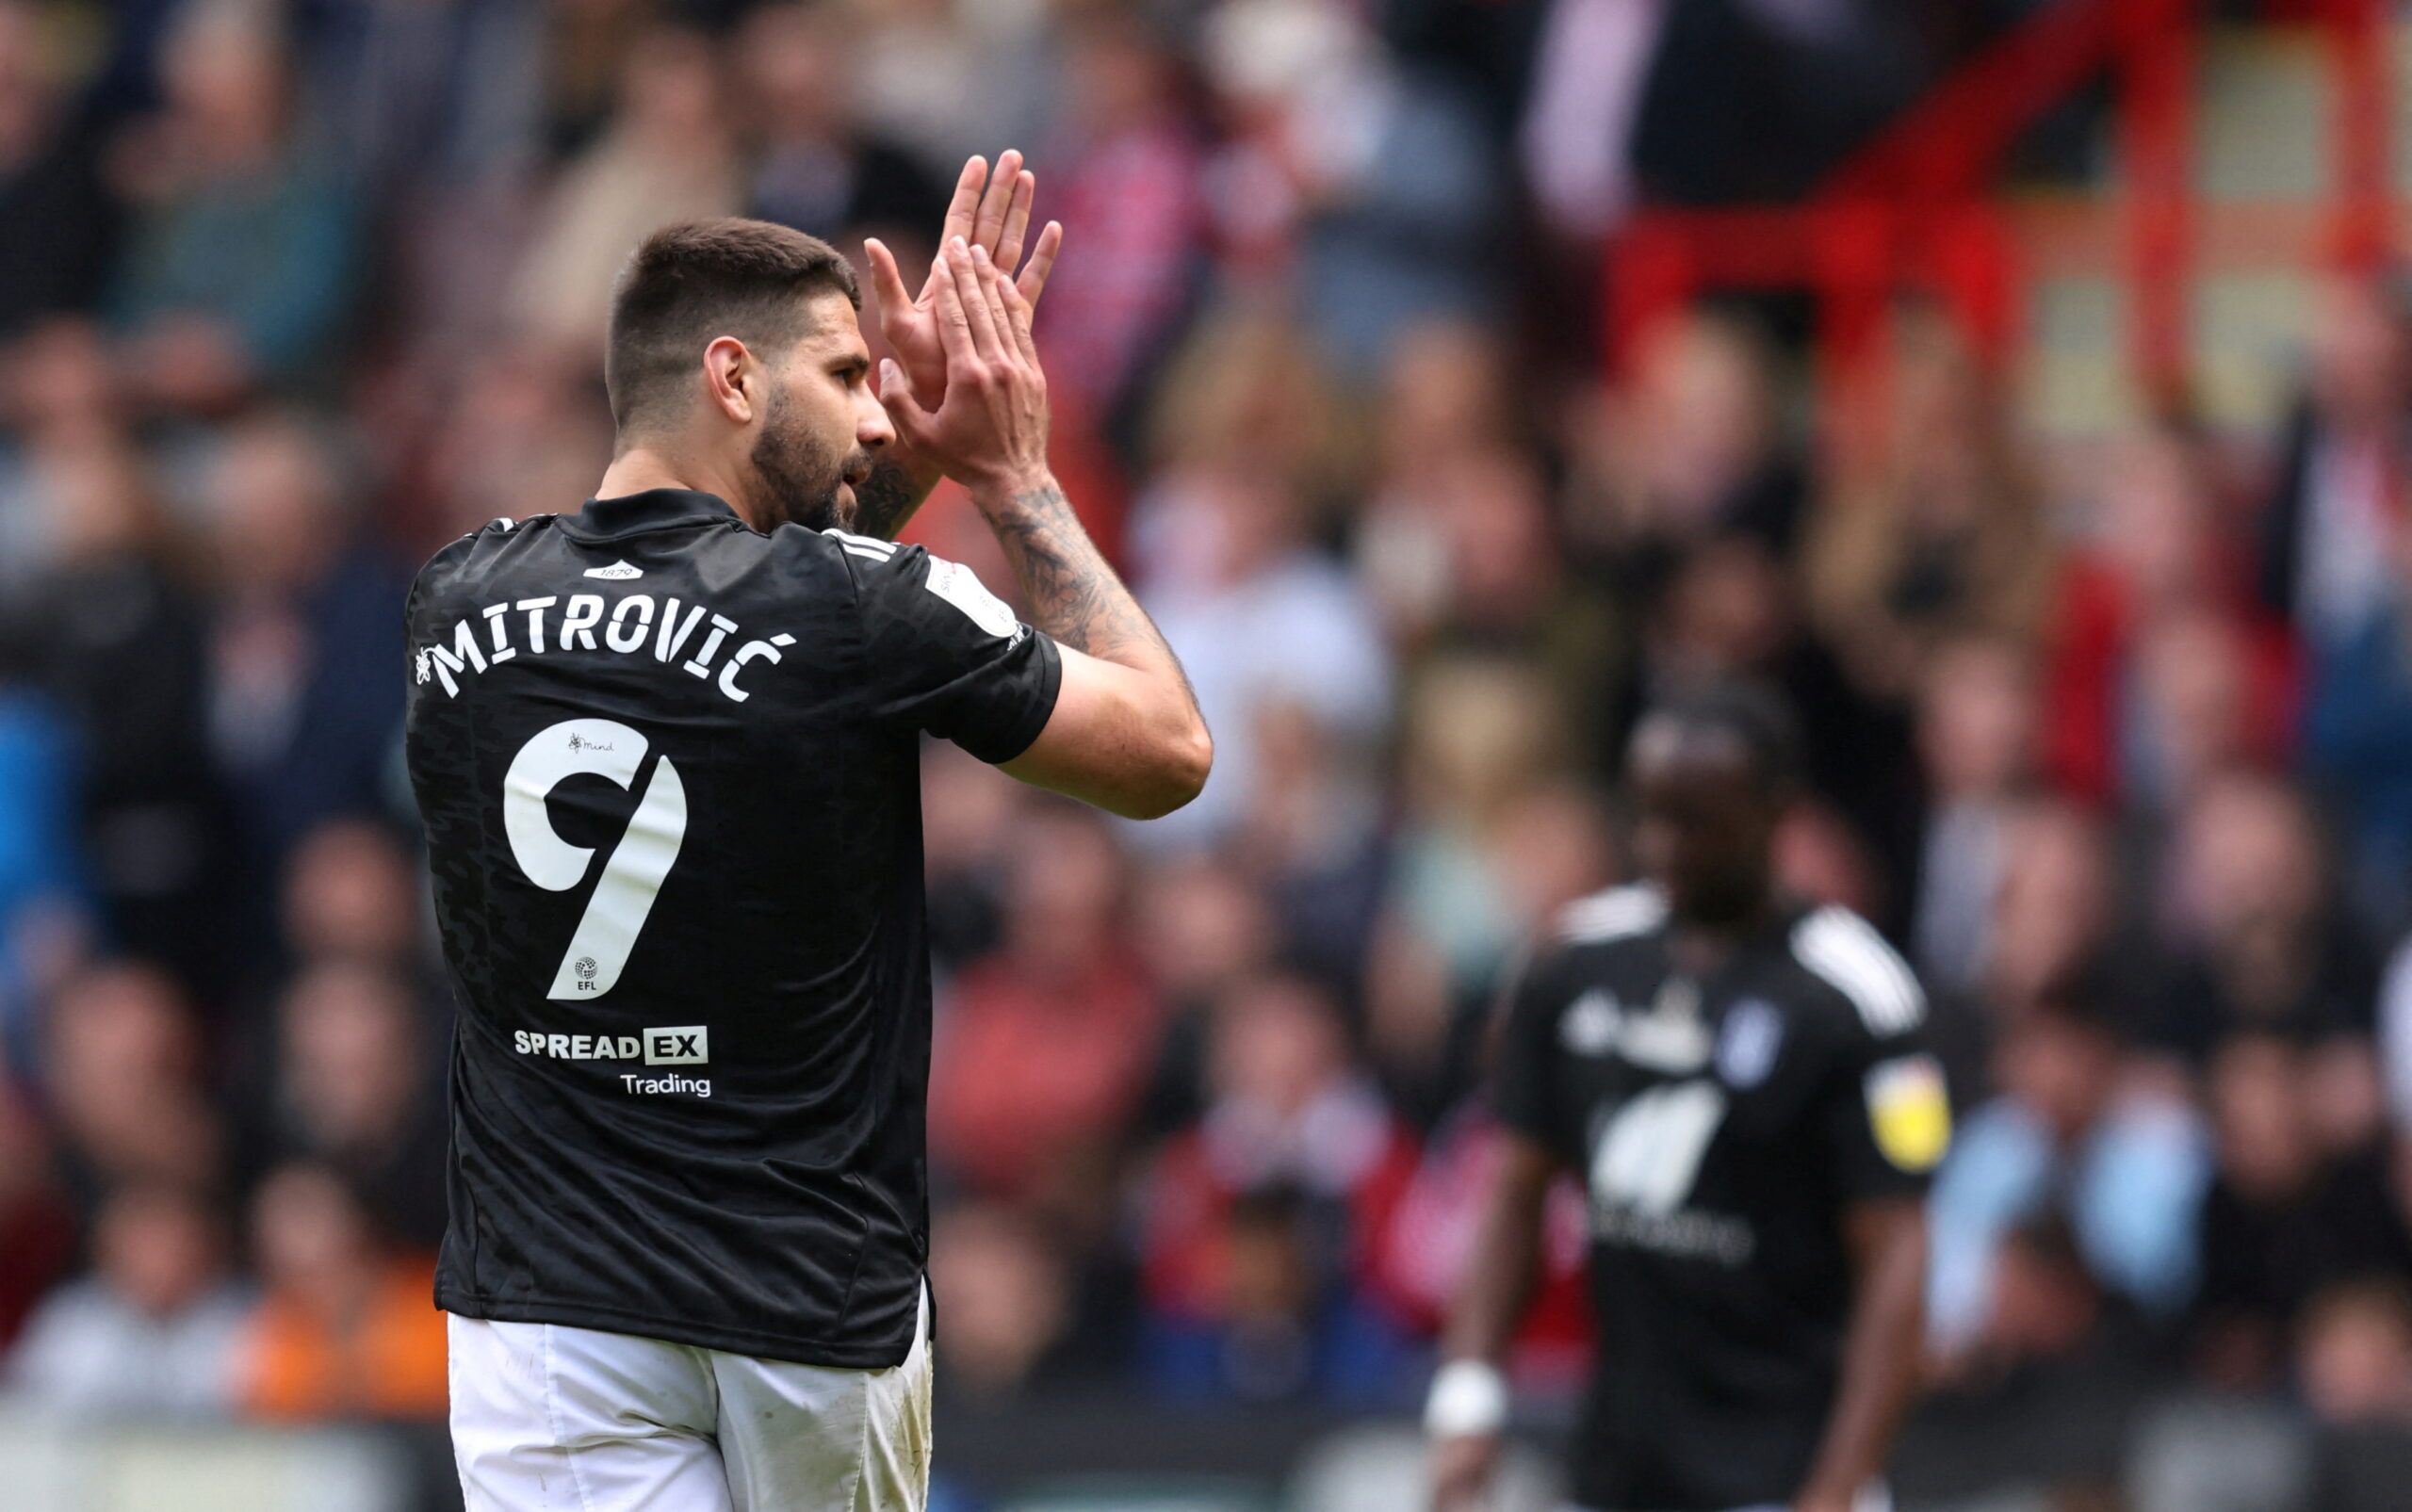 Soccer Football - Championship - Sheffield United v Fulham - Bramall Lane, Sheffield, Britain - May 7, 2022 Fulham's Aleksandar Mitrovic applauds fans after being substituted      Action Images/John Clifton  EDITORIAL USE ONLY. No use with unauthorized audio, video, data, fixture lists, club/league logos or 